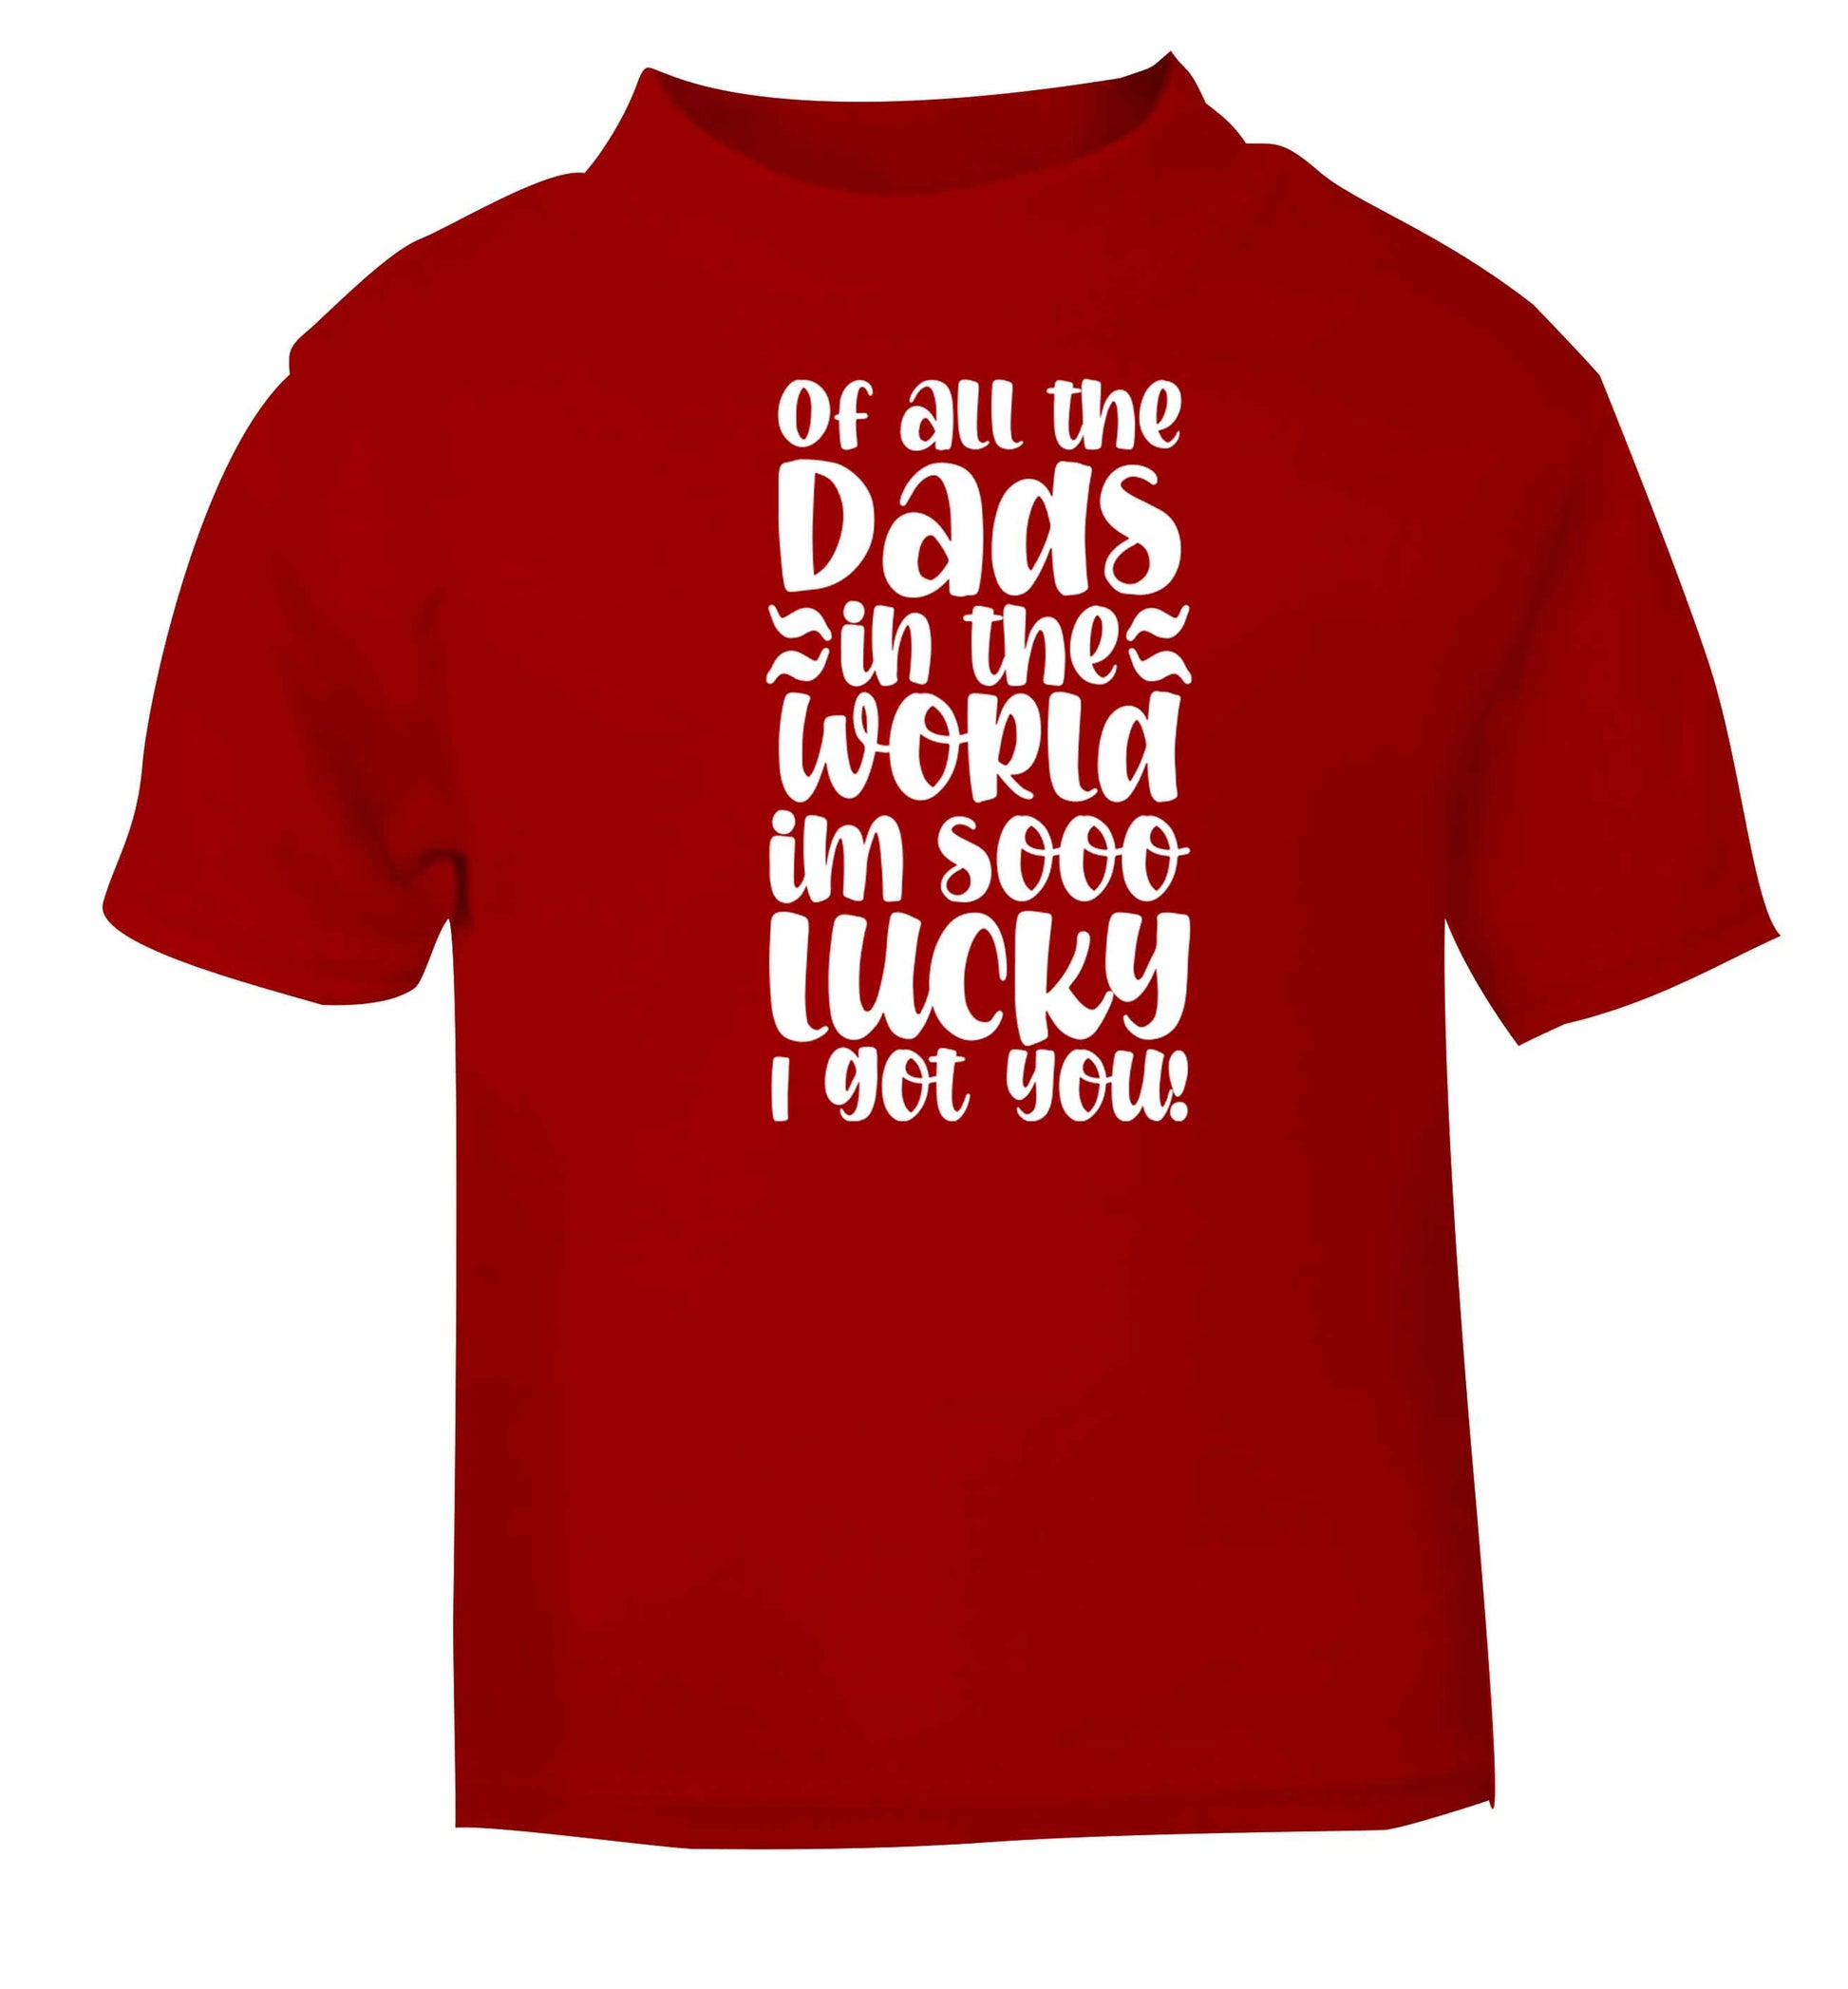 Of all the Dads in the world I'm so lucky I got you red baby toddler Tshirt 2 Years